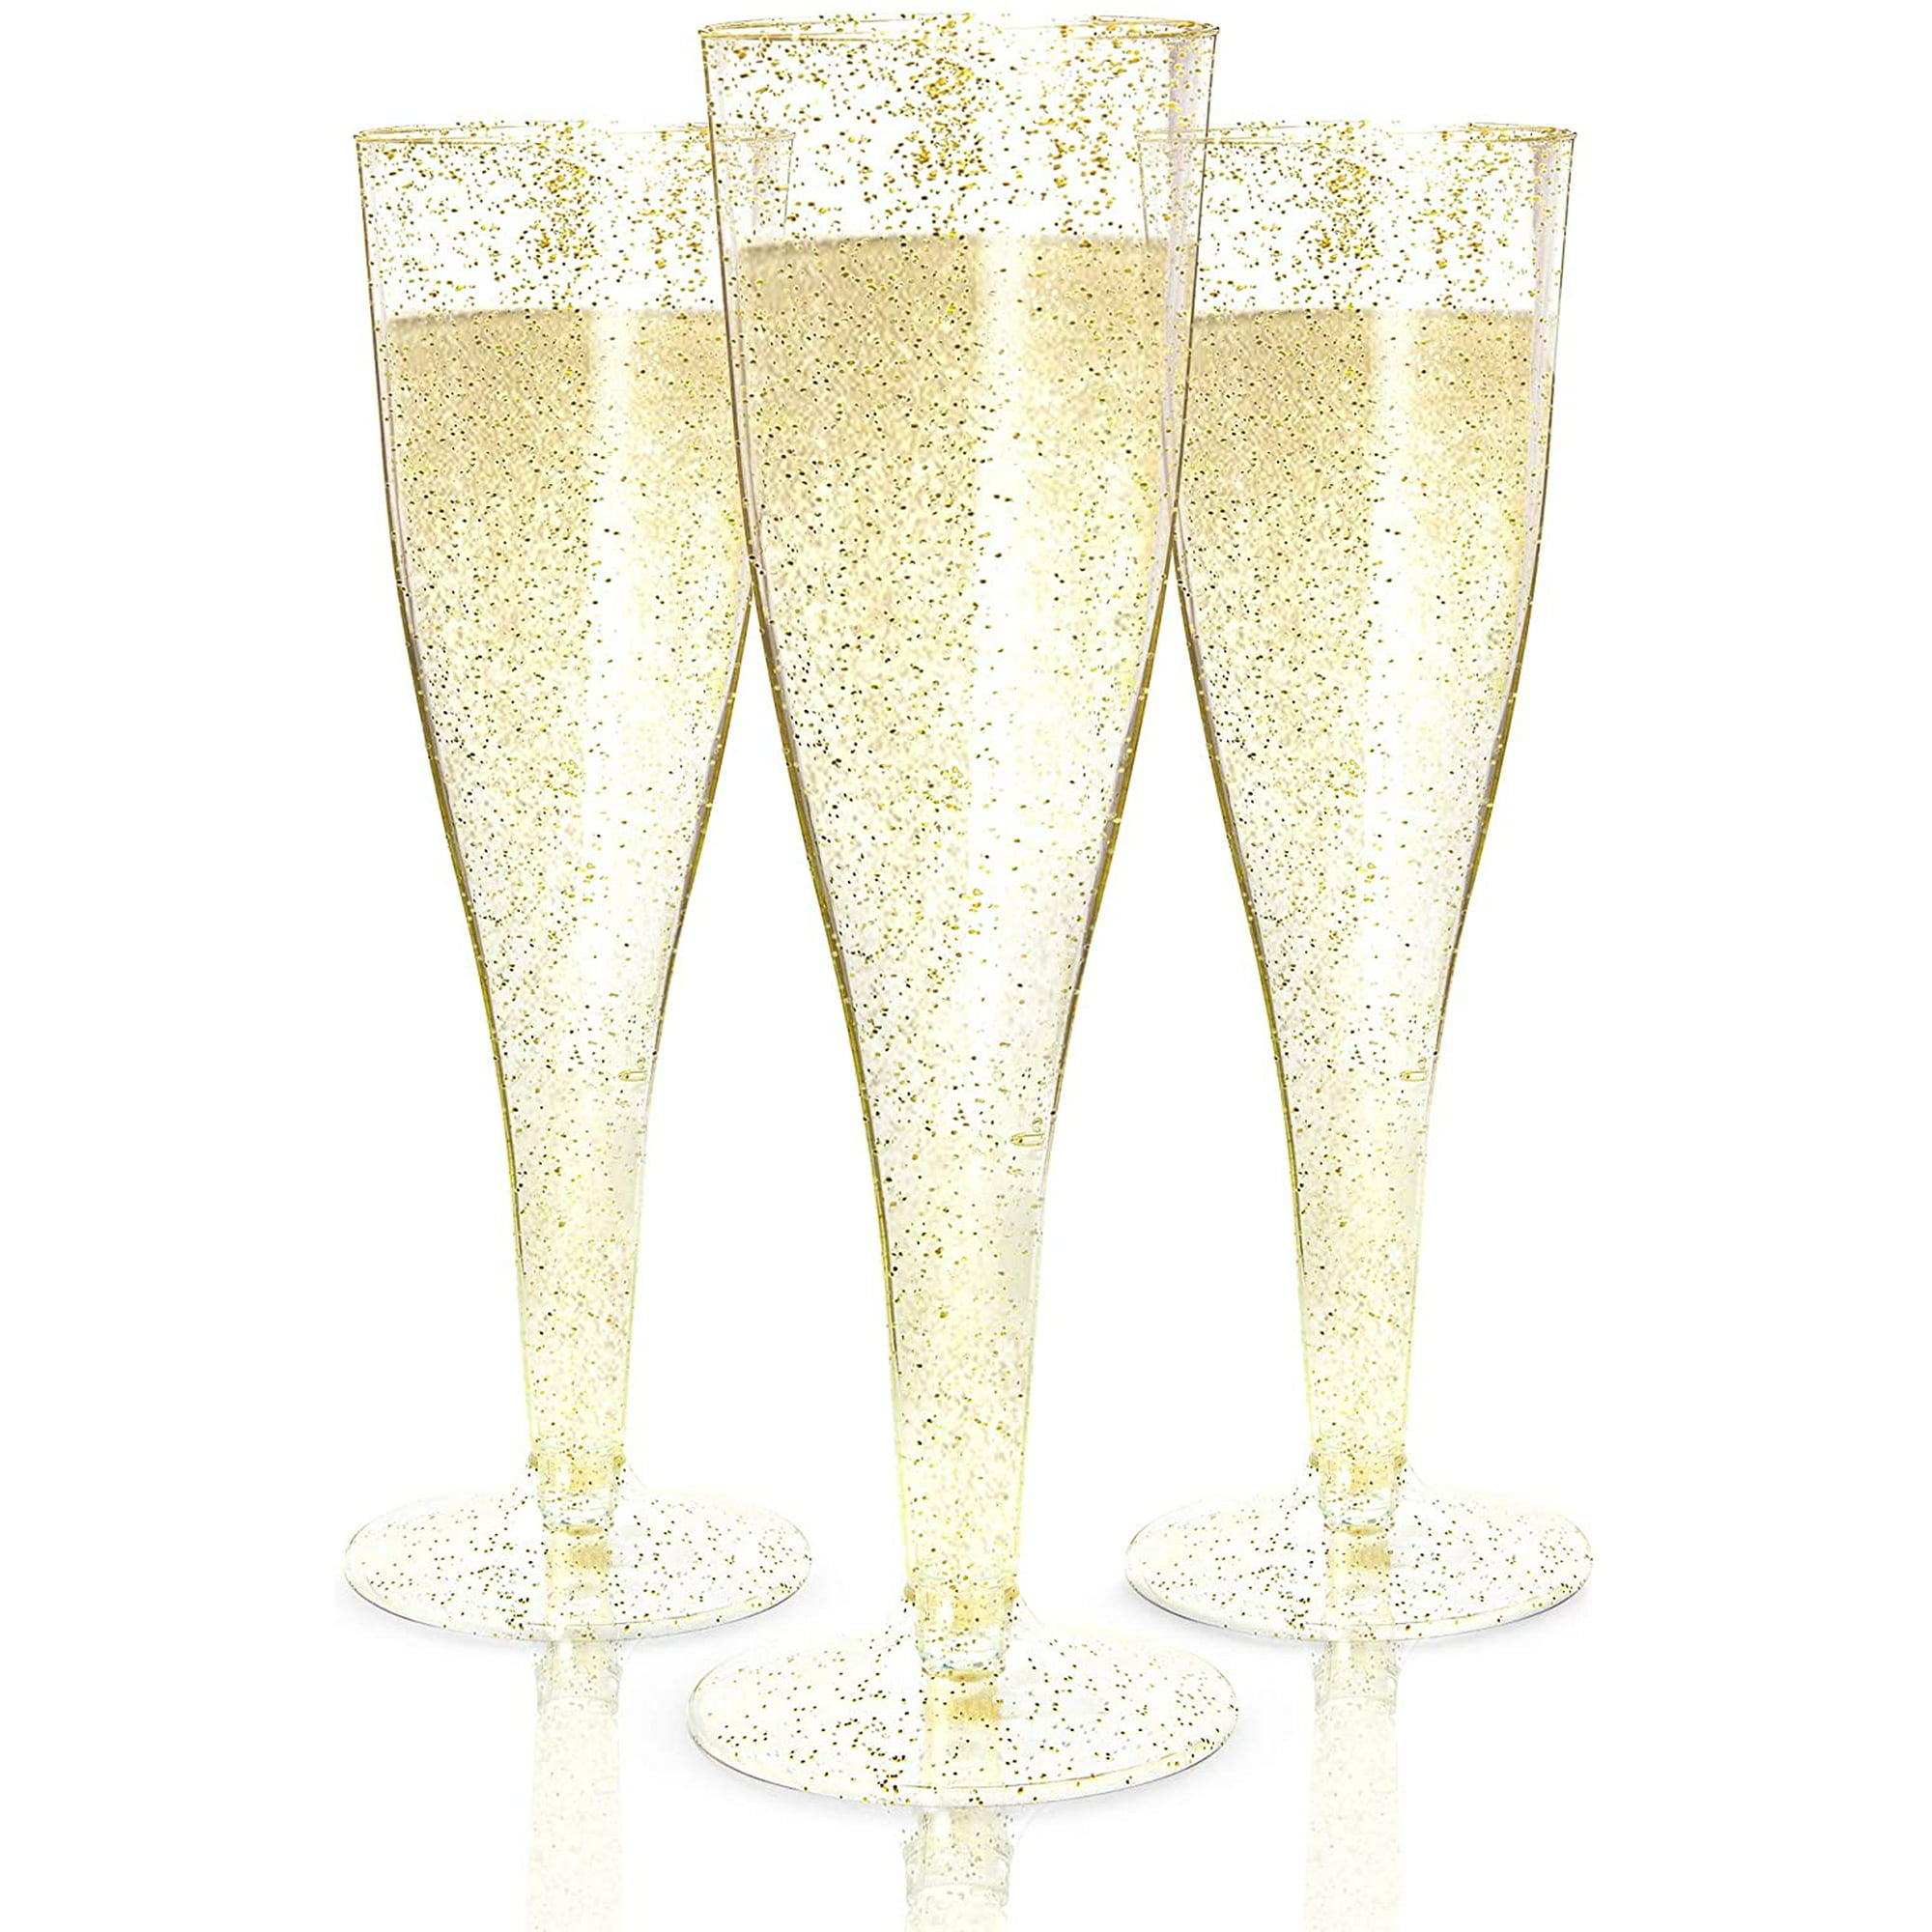  Mumufy 73 Pcs Mimosa Bar Supplies 50 oz Plastic Water Carafe  with Lids Juice Plastic Champagne Flutes Plastic Mimosa Glasses with Wooden  Chalkboard Tags Stickers Straws for Milk Wine (Gold) 